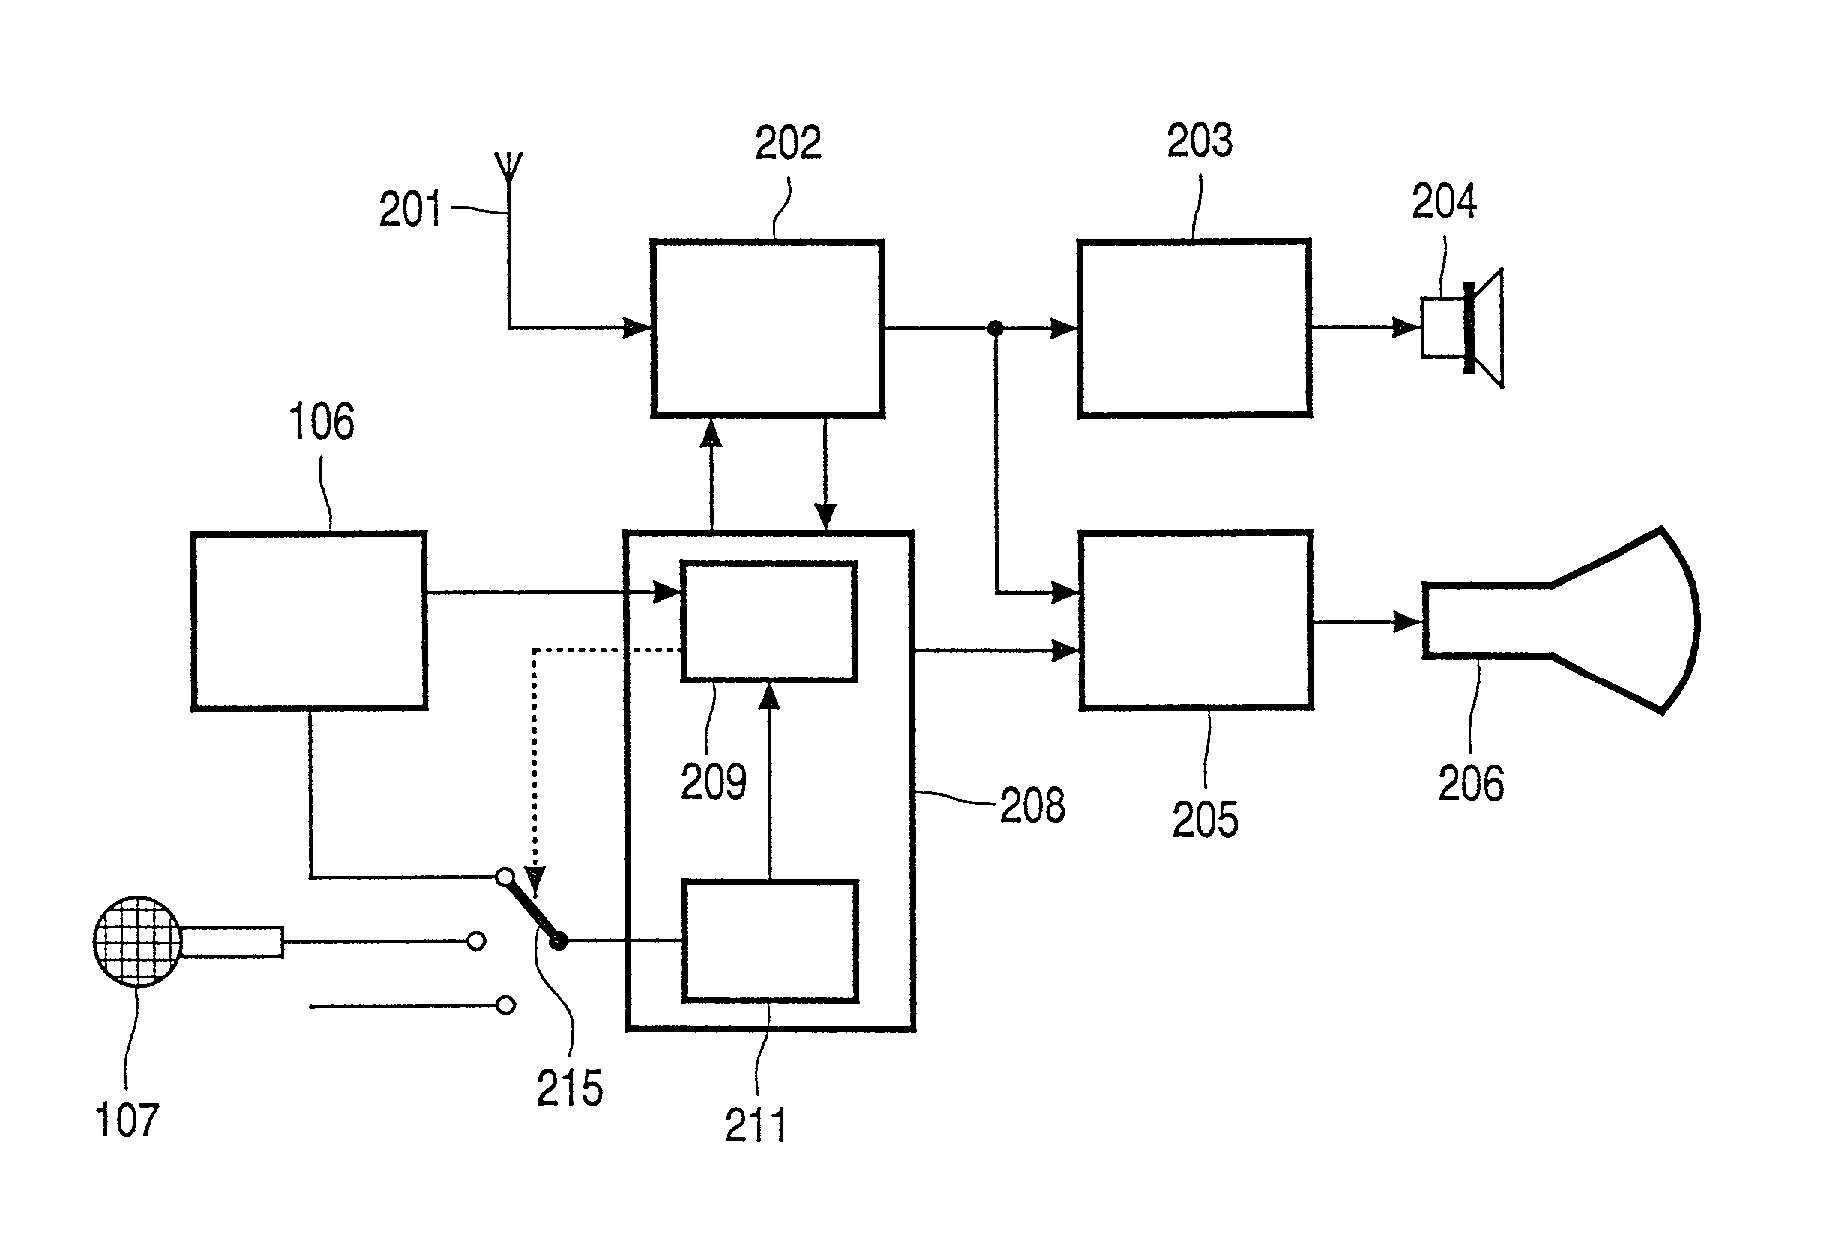 System for controlling an apparatus with speech commands